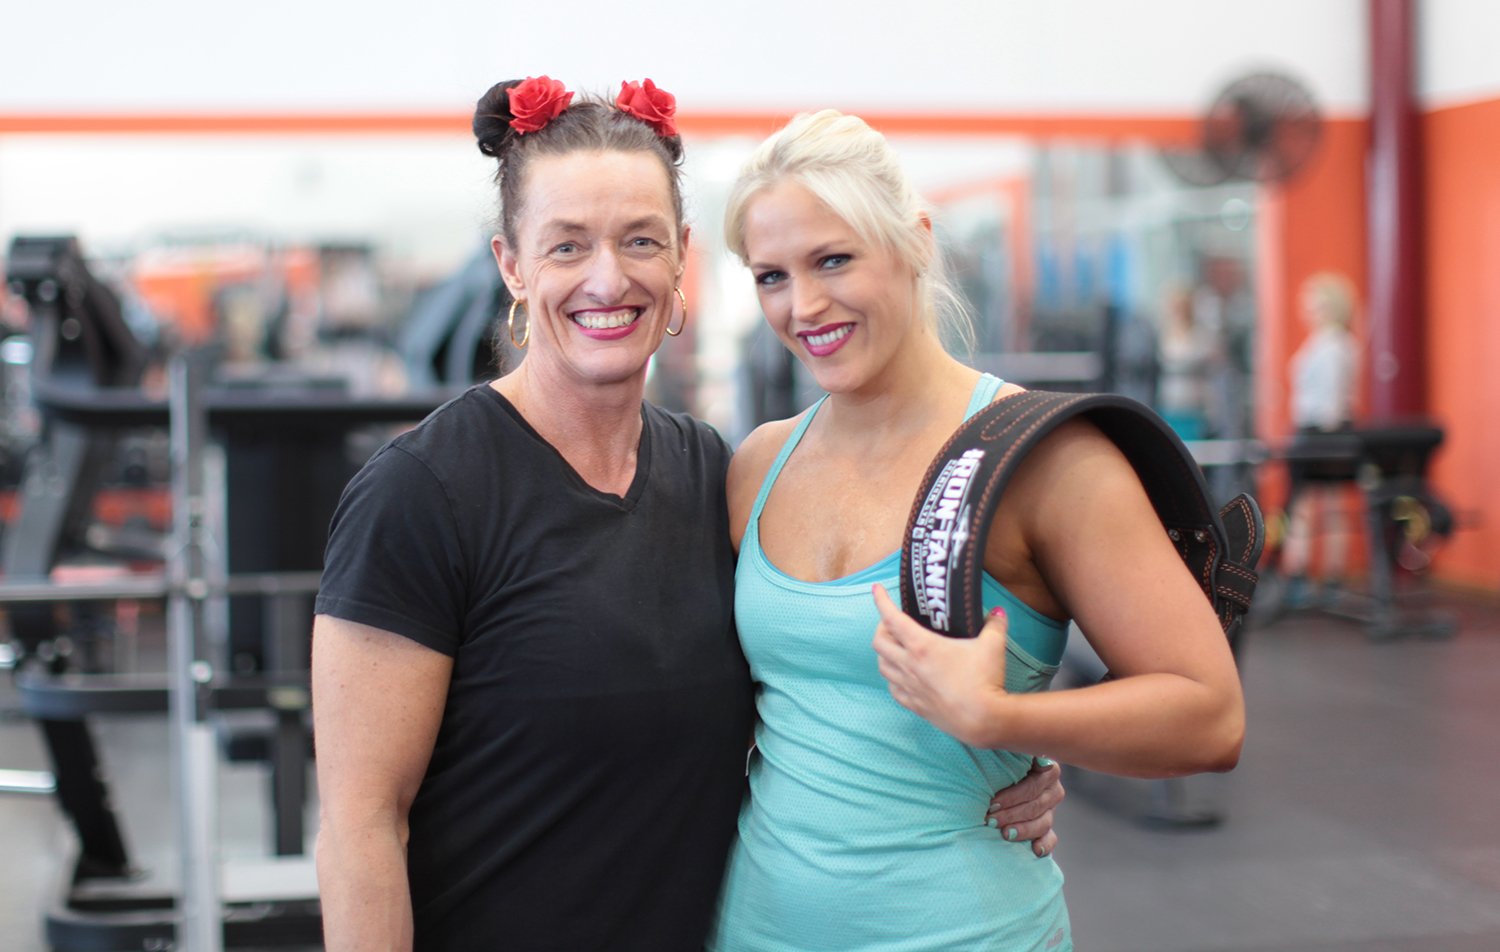 Geelong's experienced personal trainer Ingrid Barclay and client Leah in gym gear hugging